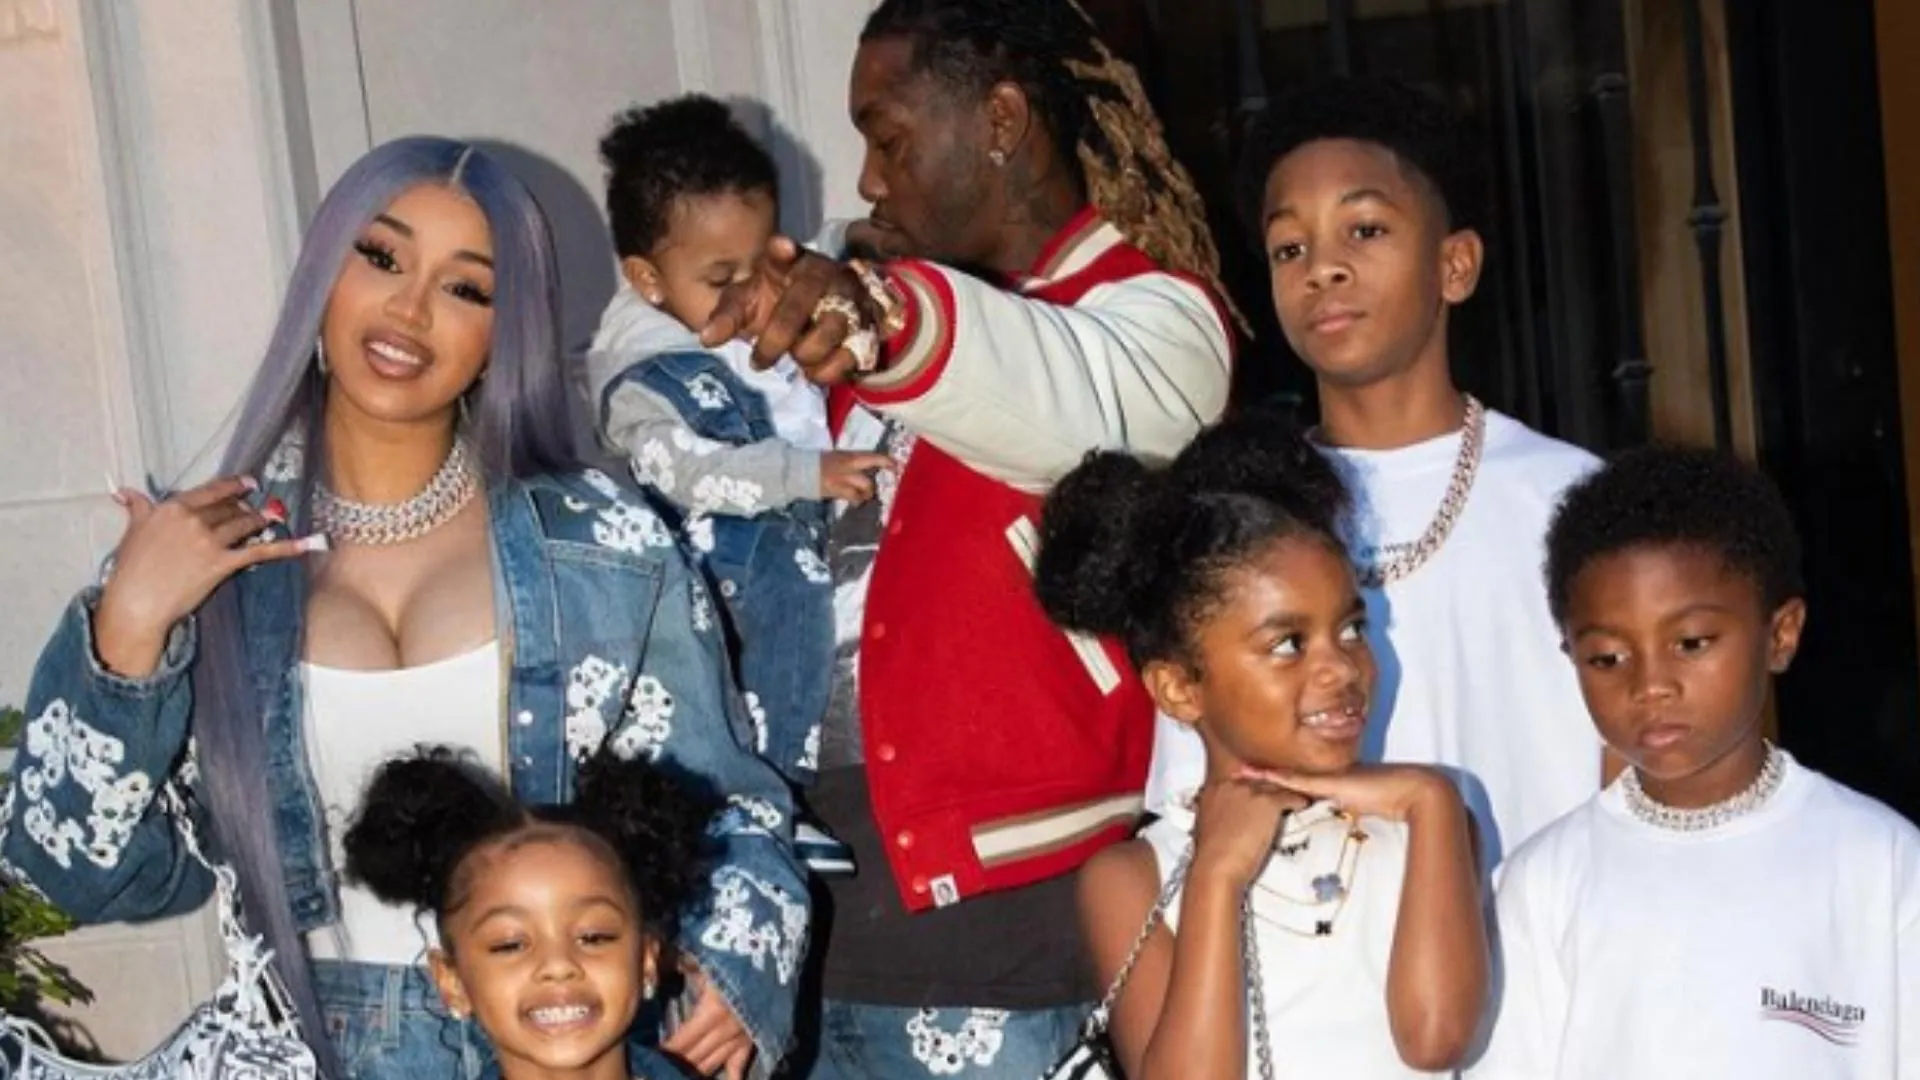 Offset father of 5 opened up about balancing his career and family